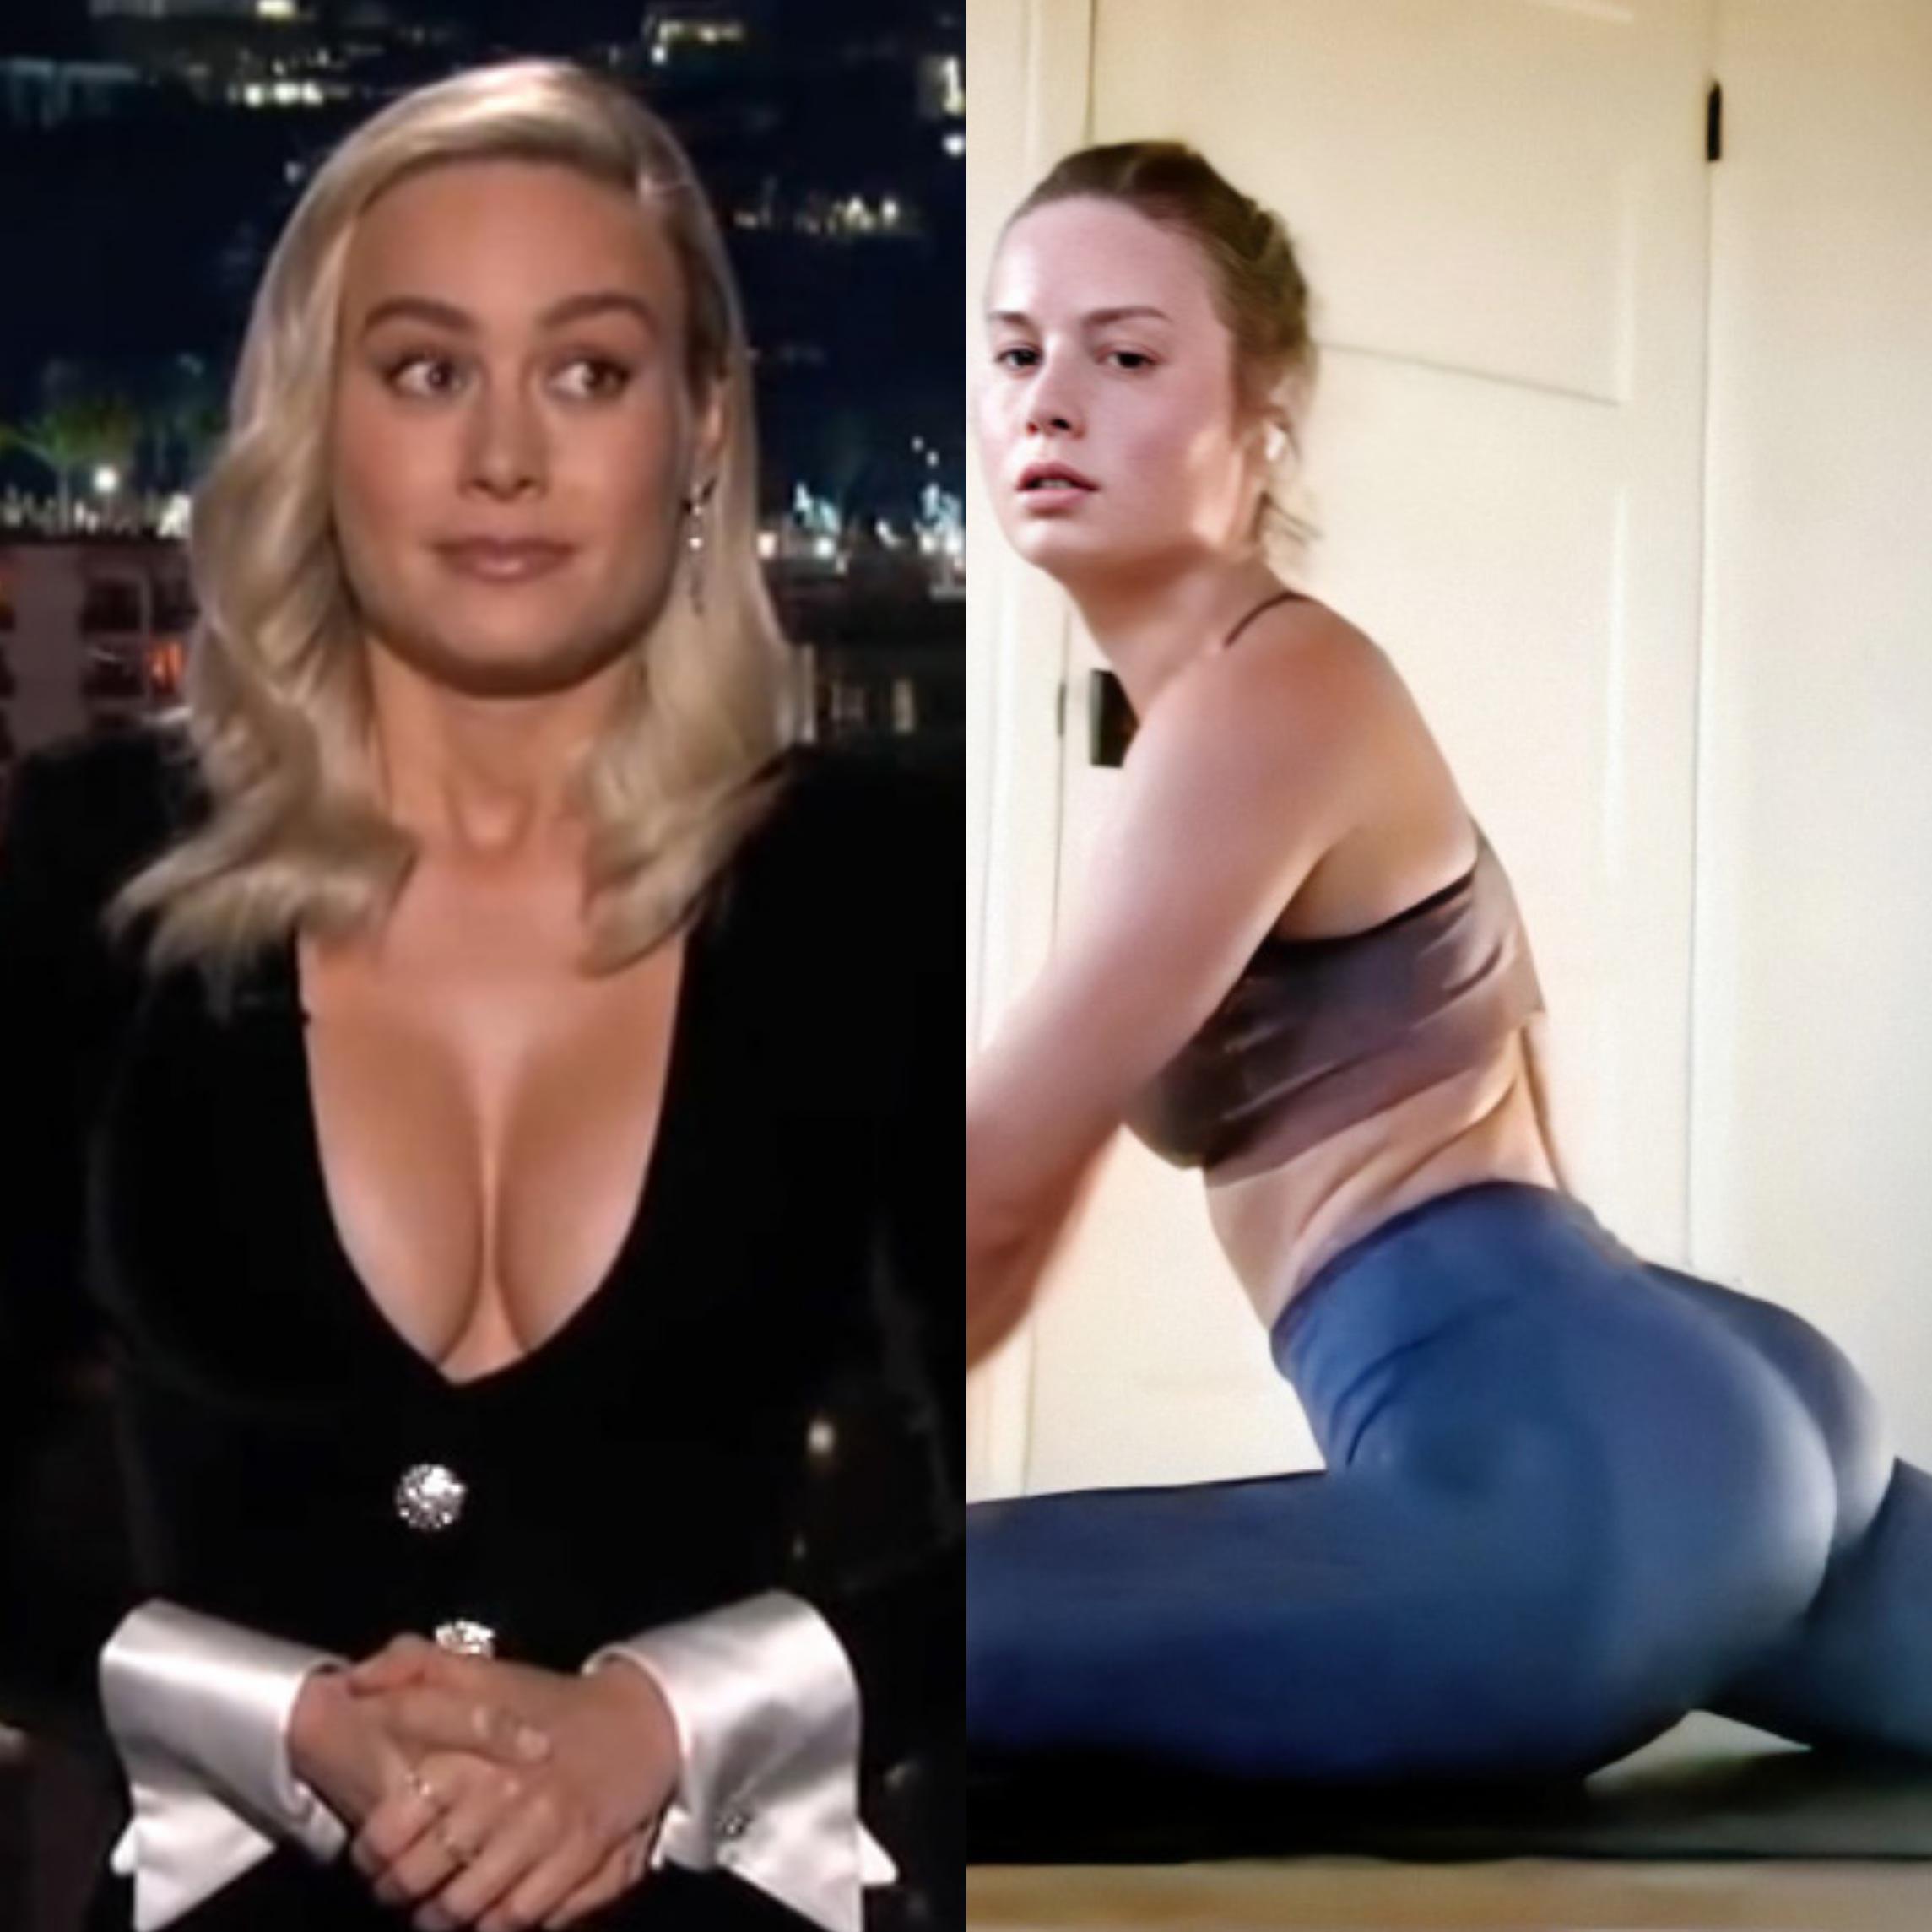 I love how Brie Larson turned herself into a sex